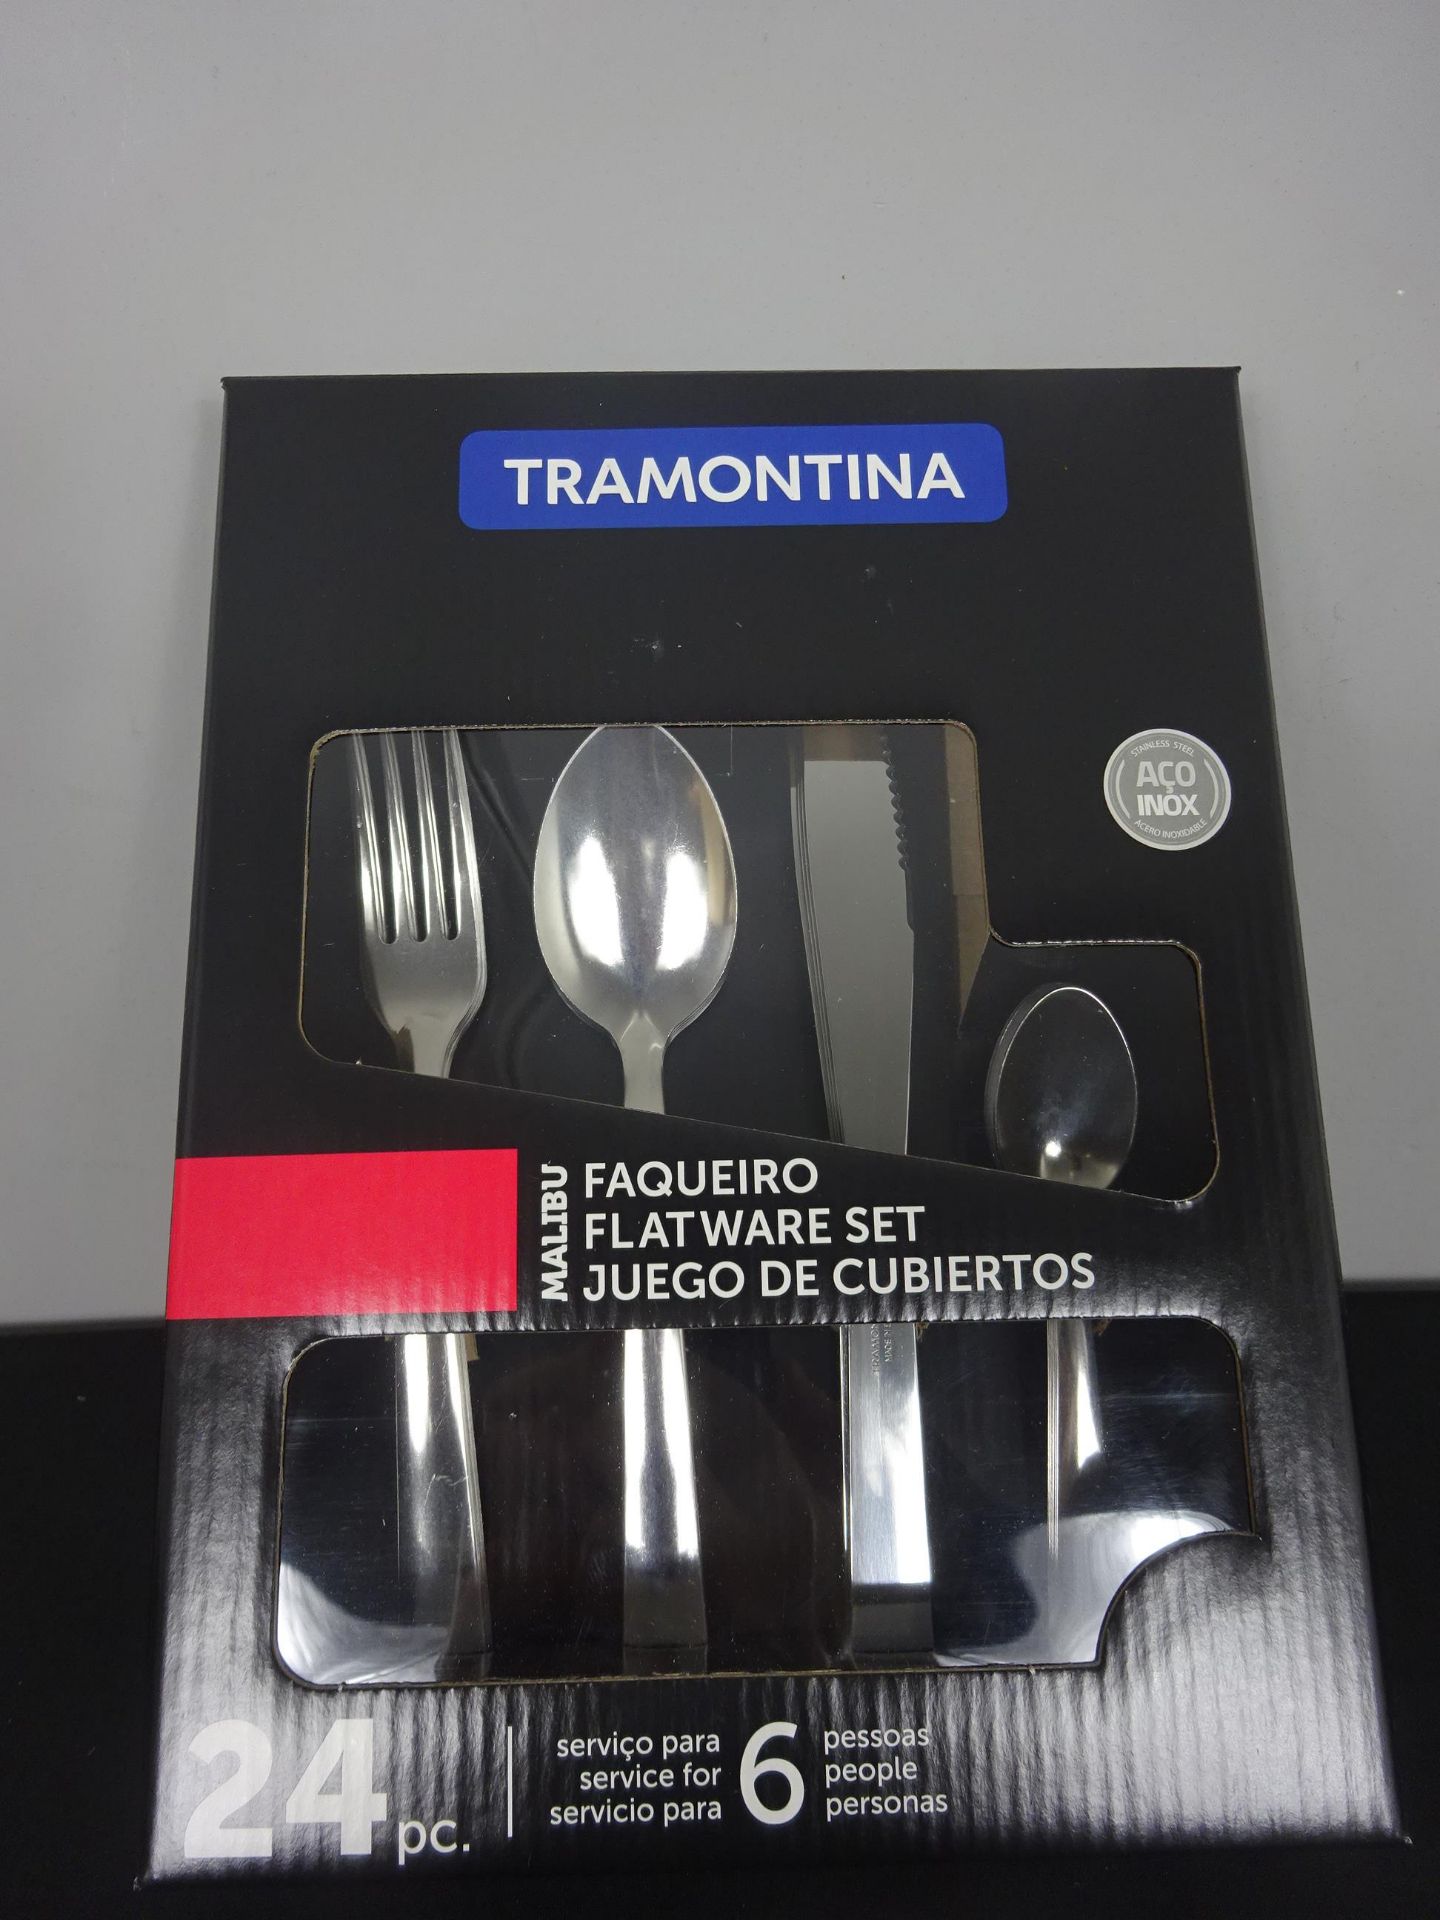 New 24pc Tramontina Cuttlery Set Includes 6 Steak Knives, 6 Forks, 6 Teaspoons & 6 Table Spoons